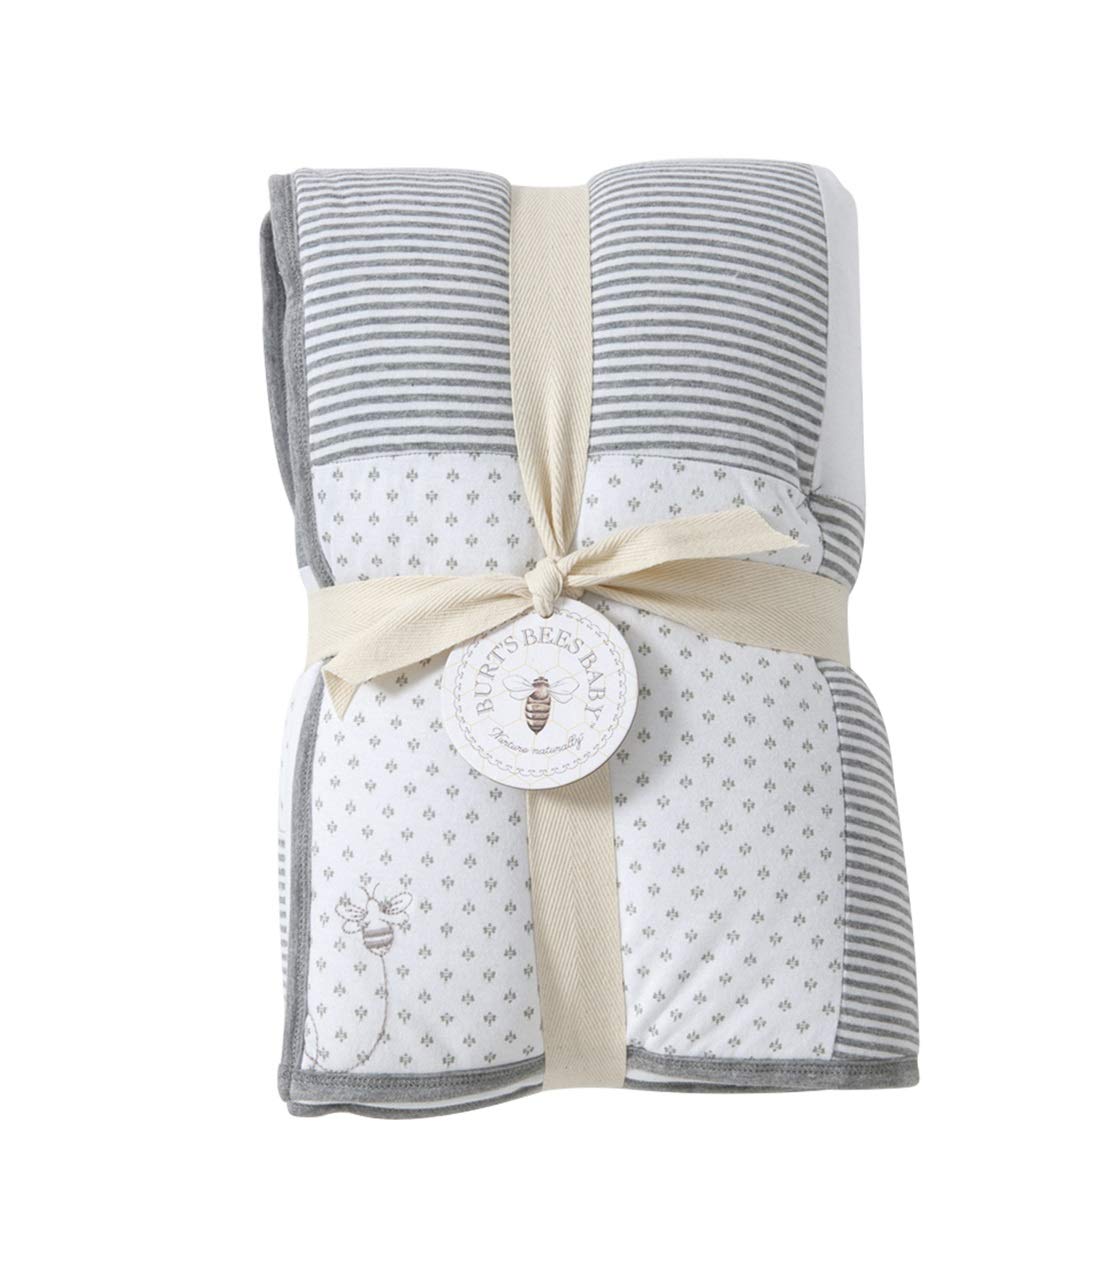 Burt's Bees Baby - Reversible Quilt Baby Blanket, Dottie Bee Print, 100% Organic Cotton and 100% Polyester Fill 